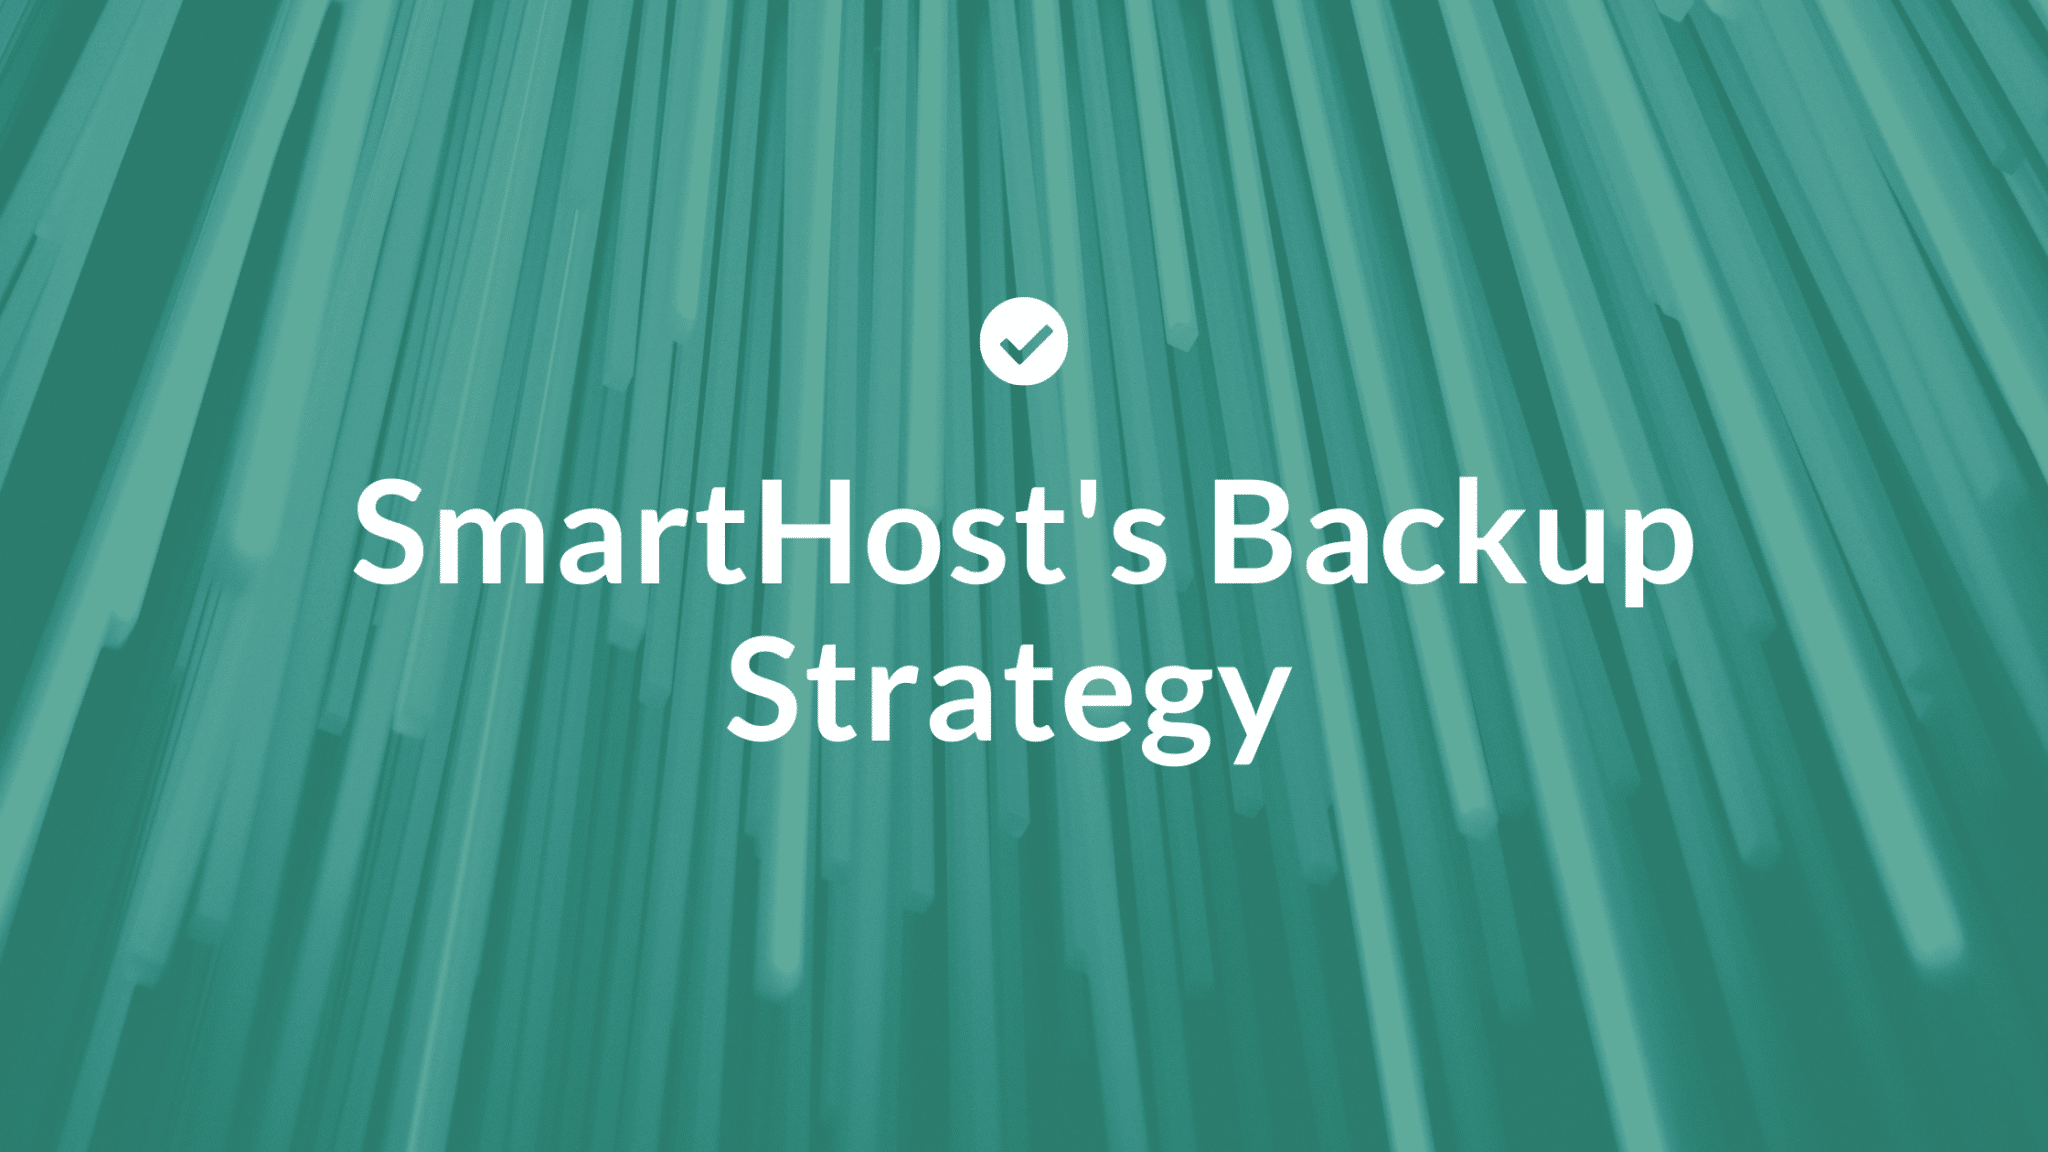 A teal, aqua, and turquoise screenshot displays text in green, showcasing SmartHost's Backup Strategy.